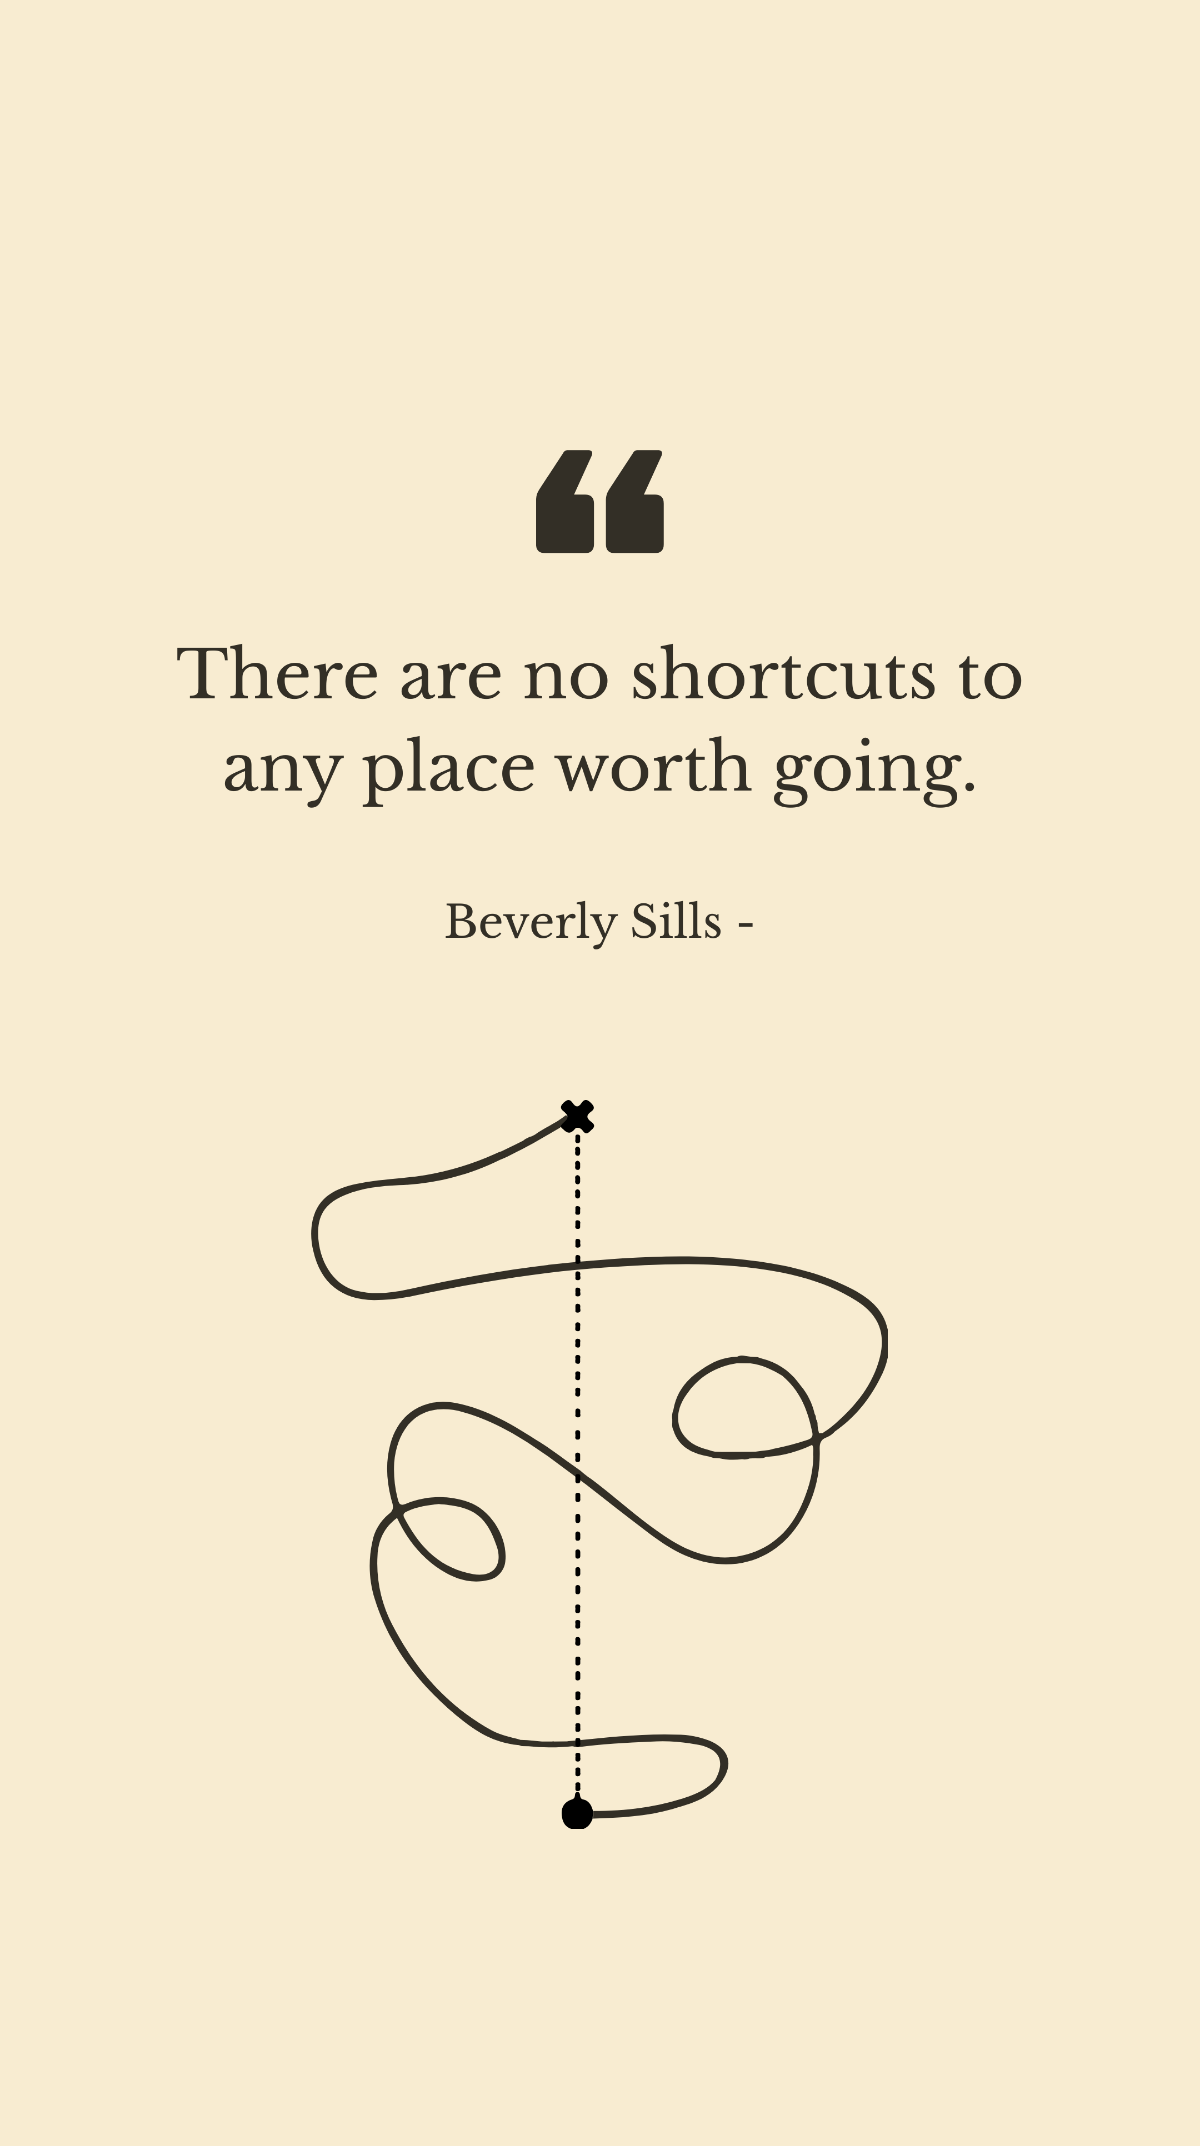 Beverly Sills - There are no shortcuts to any place worth going. Template